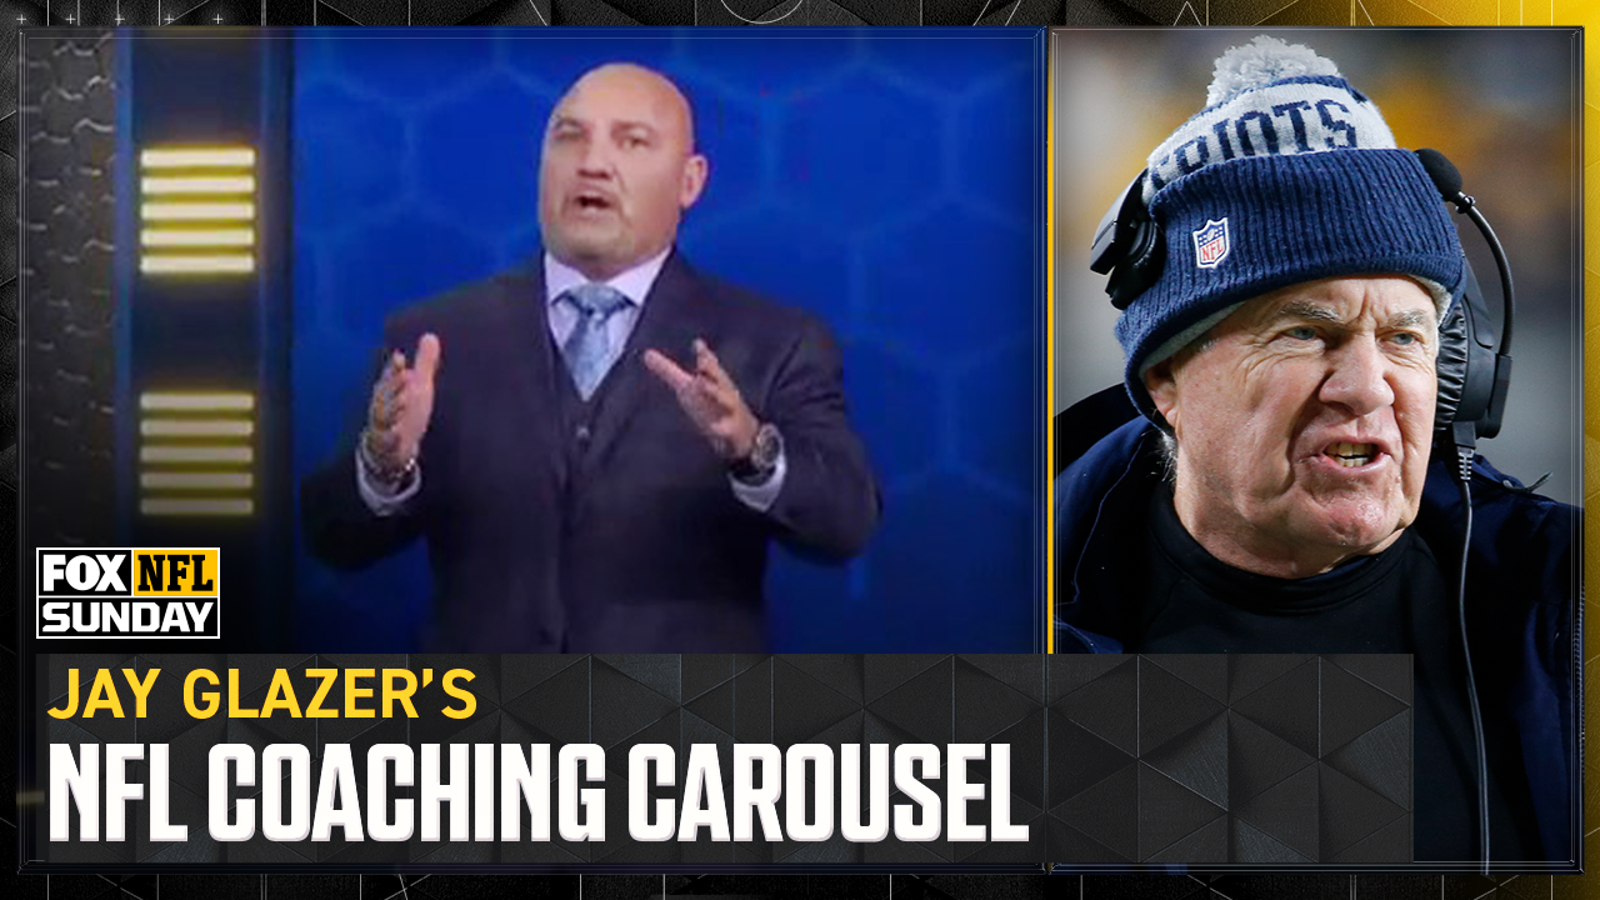 Coaching Carousel: Who's safe & Who's Out?